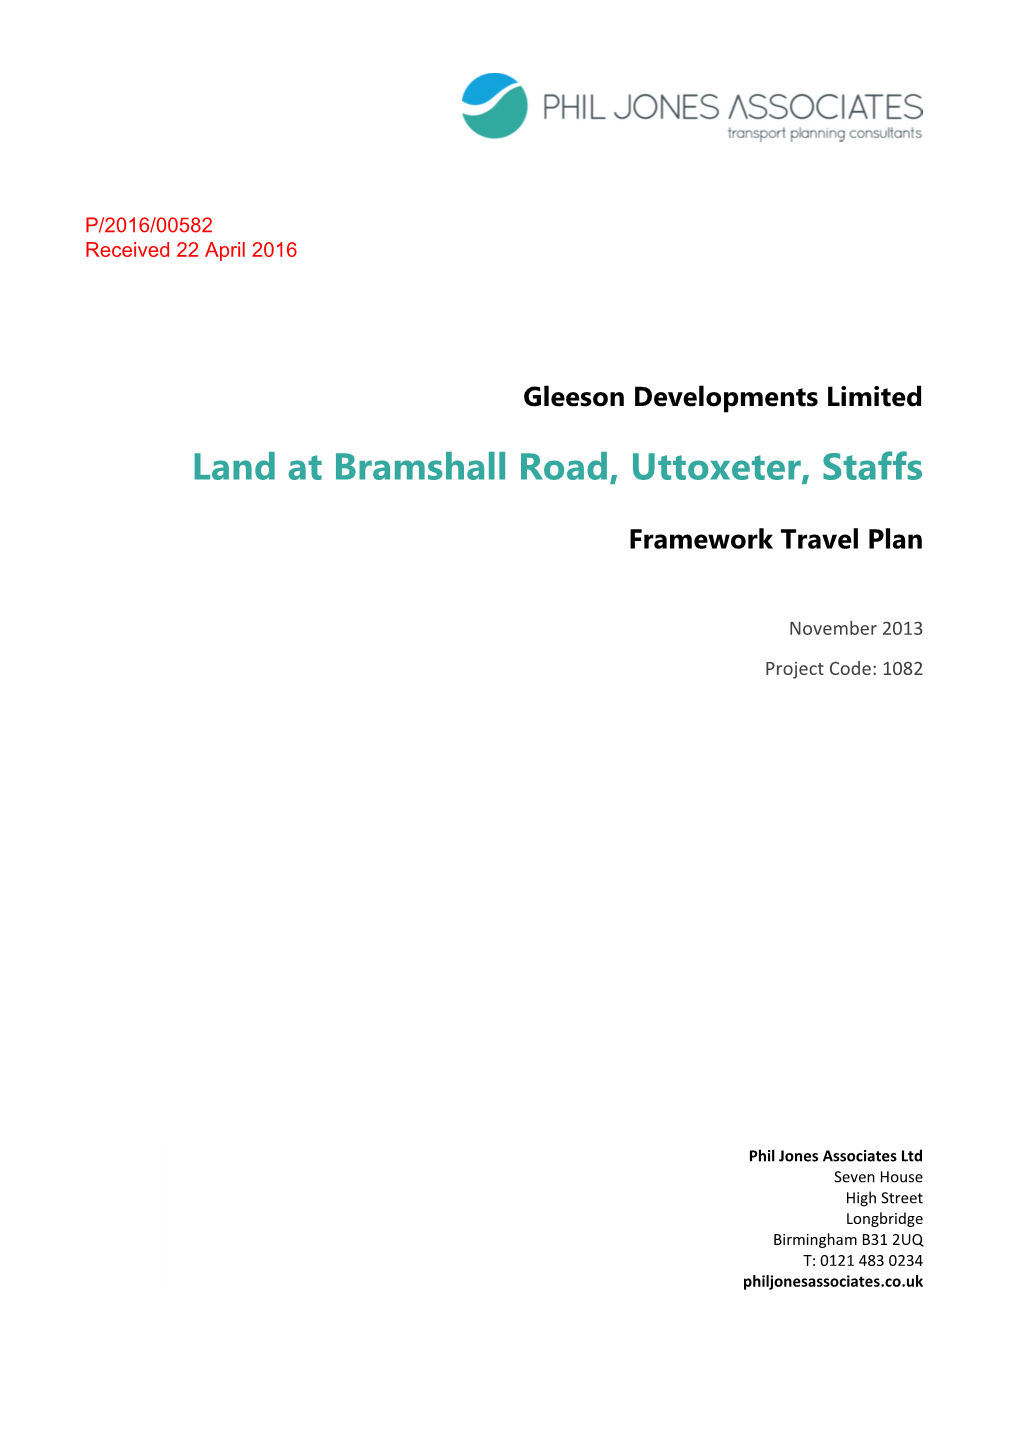 Travel Plan. the Document Will Be a Recorded Agreement Between Staffordshire County Council and the Developer Which Provides a Commitment to Deliver the Travel Plan